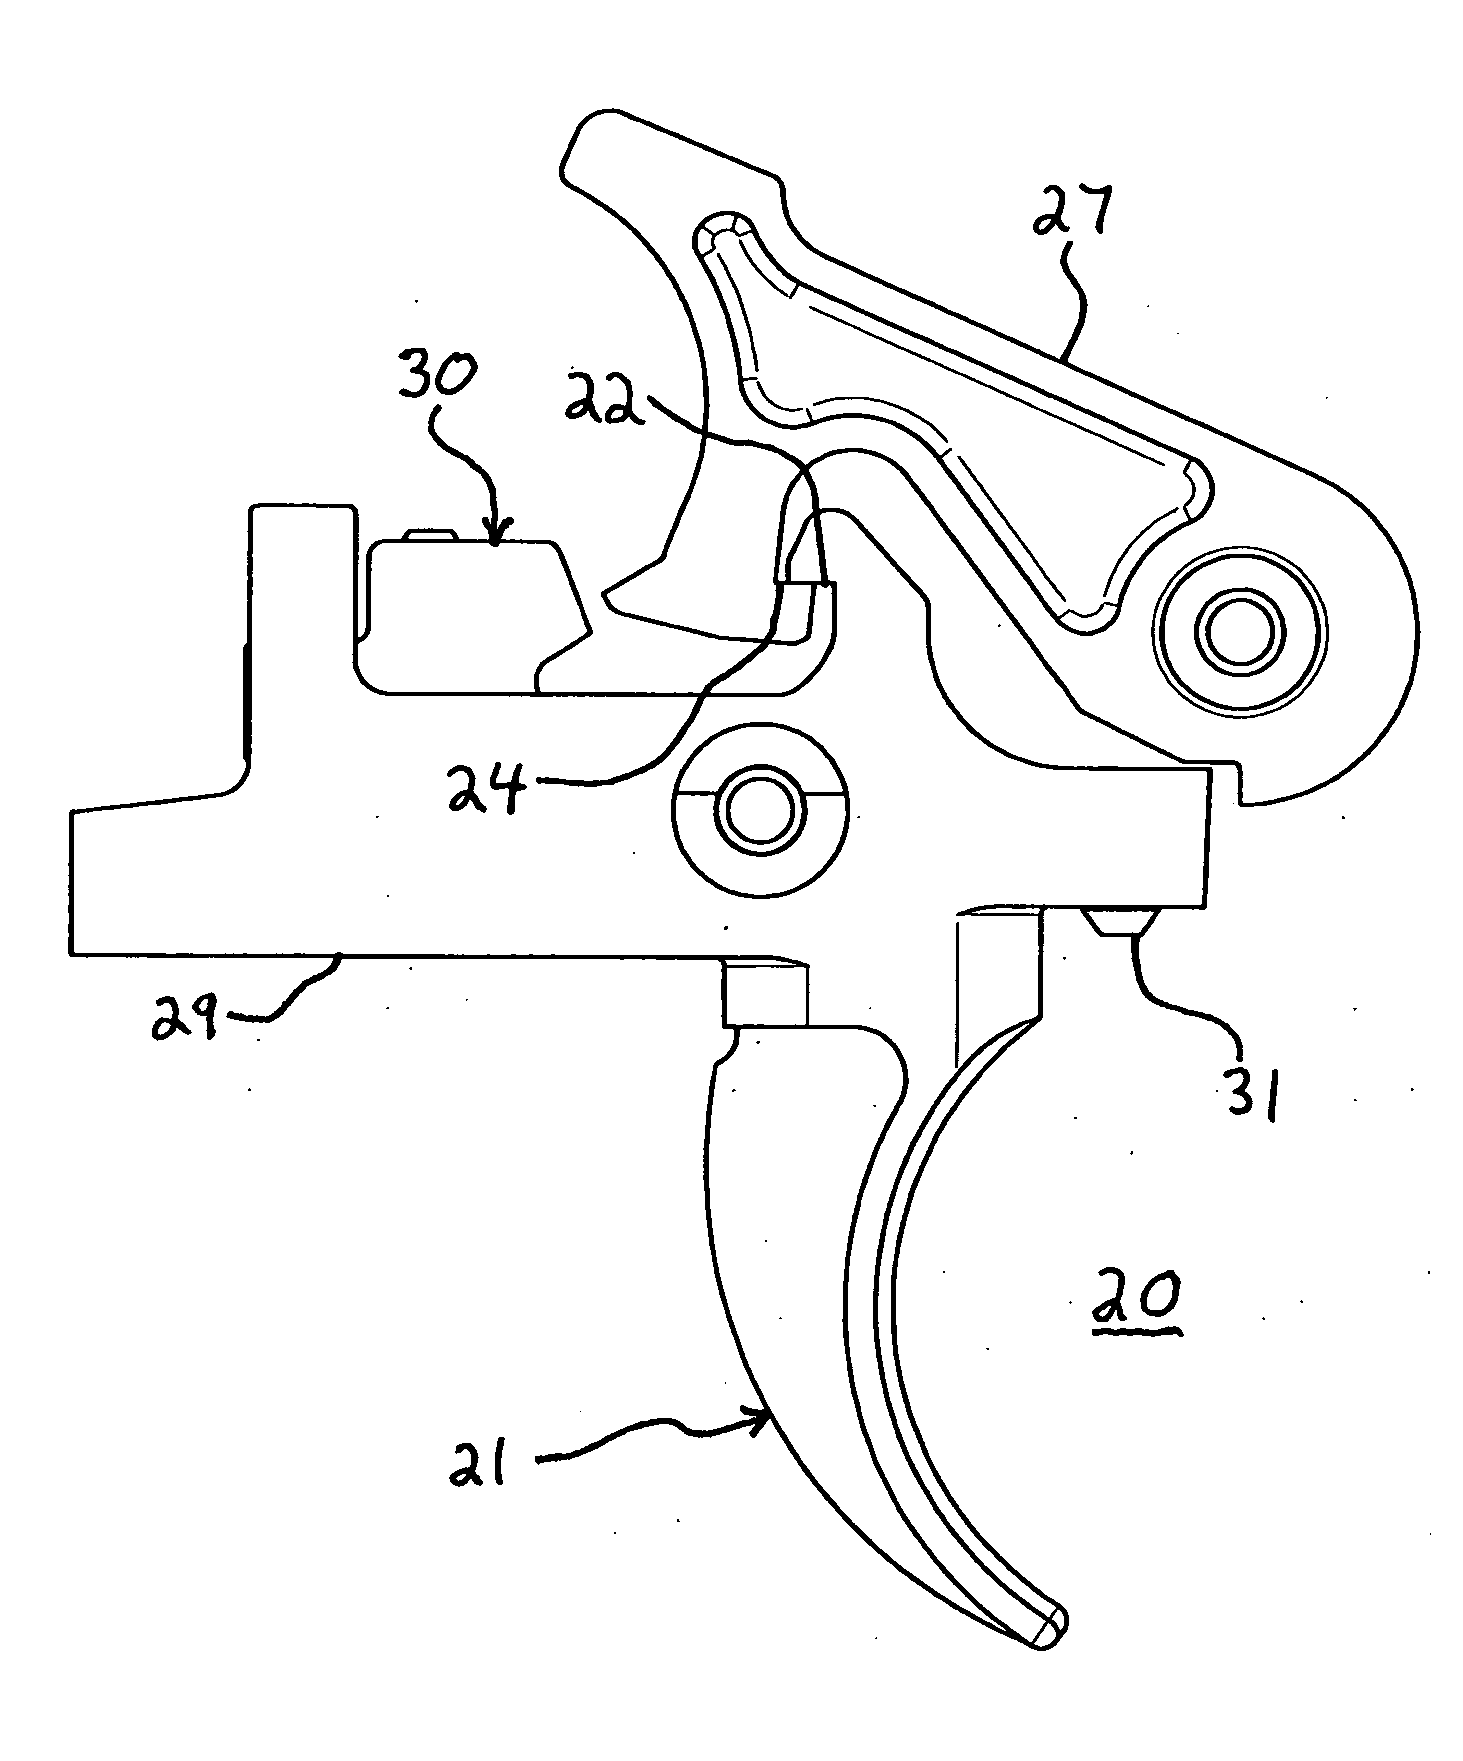 Adjustable dual stage trigger mechanism for semi-automatic weapons